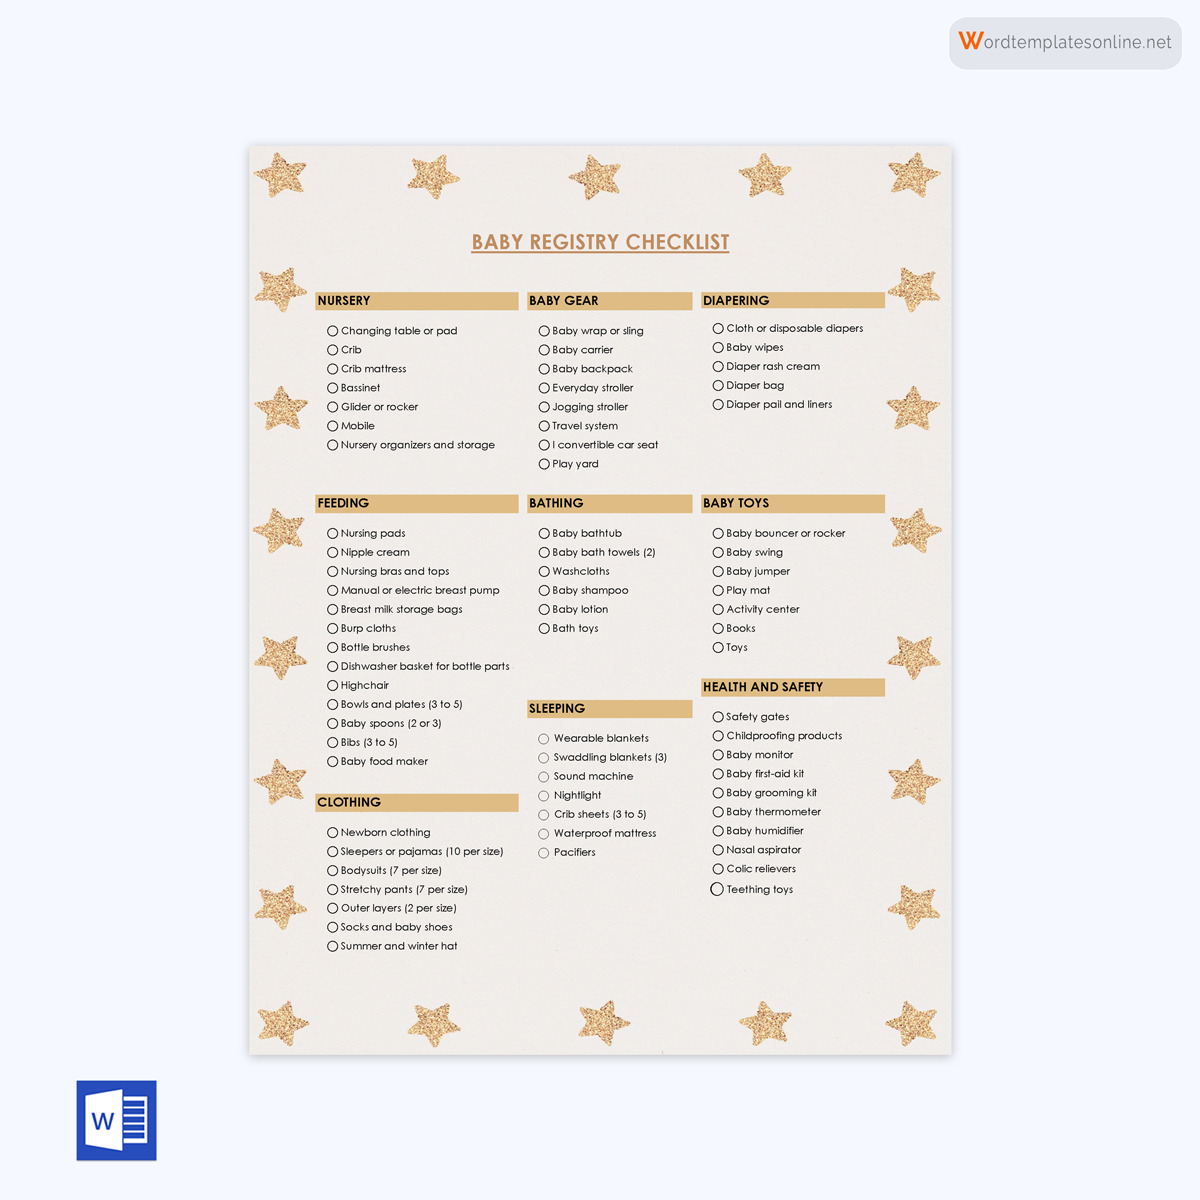 Great Customizable Baby Registry Bubbles Checklist for Word File